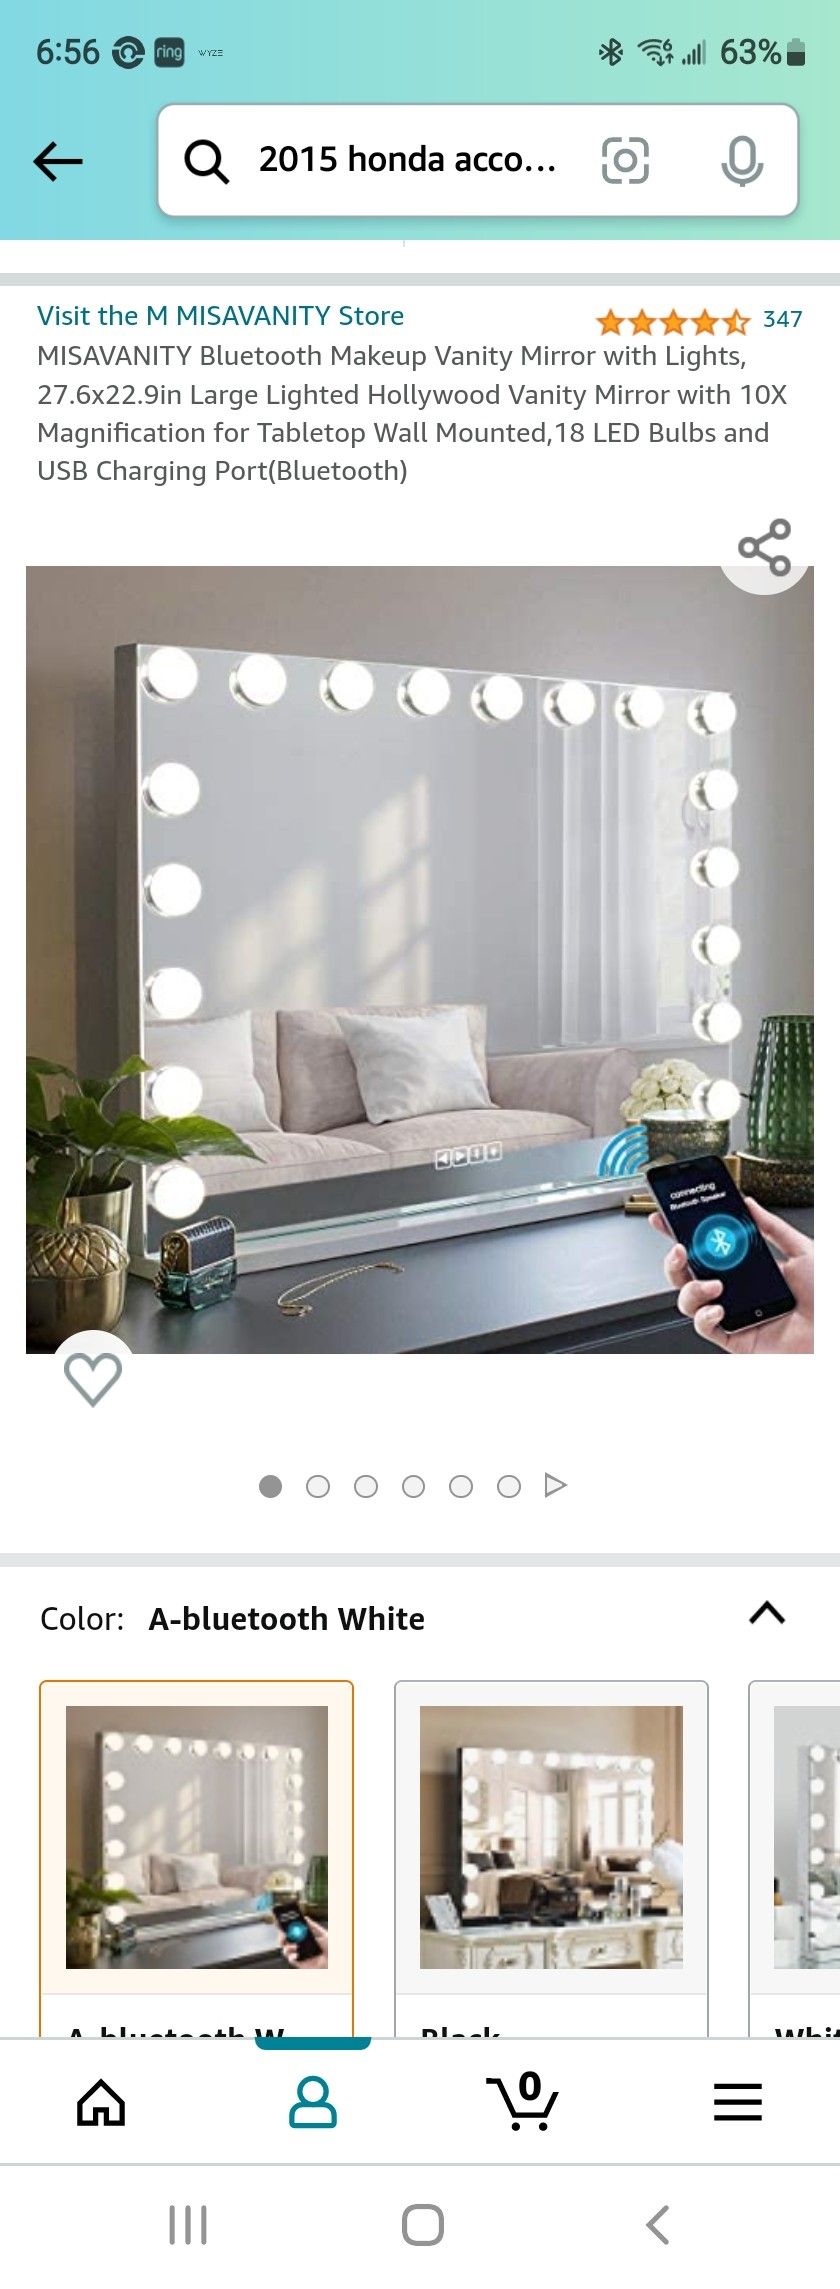 Bluetooth Makeup Vanity Mirror with Lights, 27.6x22.9in Large